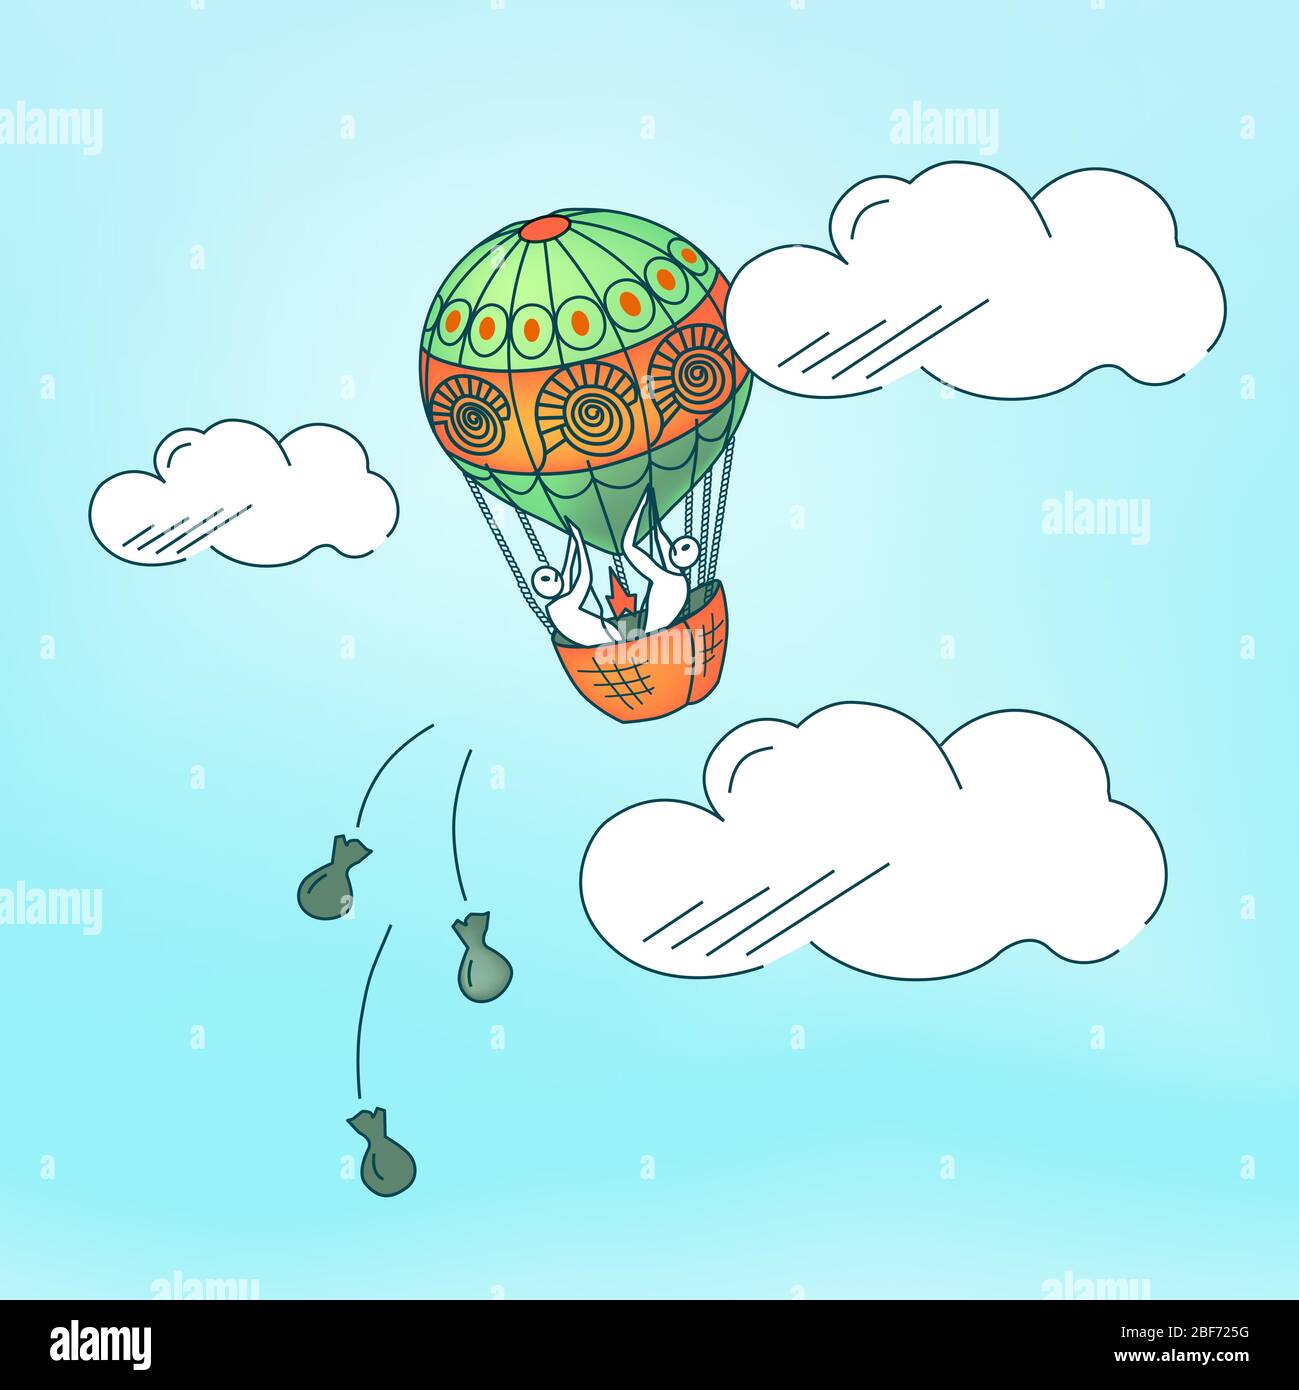 Vector illustration of balloon with frightened people in a panic on topic of getting rid of excess cargo, things, ballast. Сoncept of reasonable, smar Stock Vector